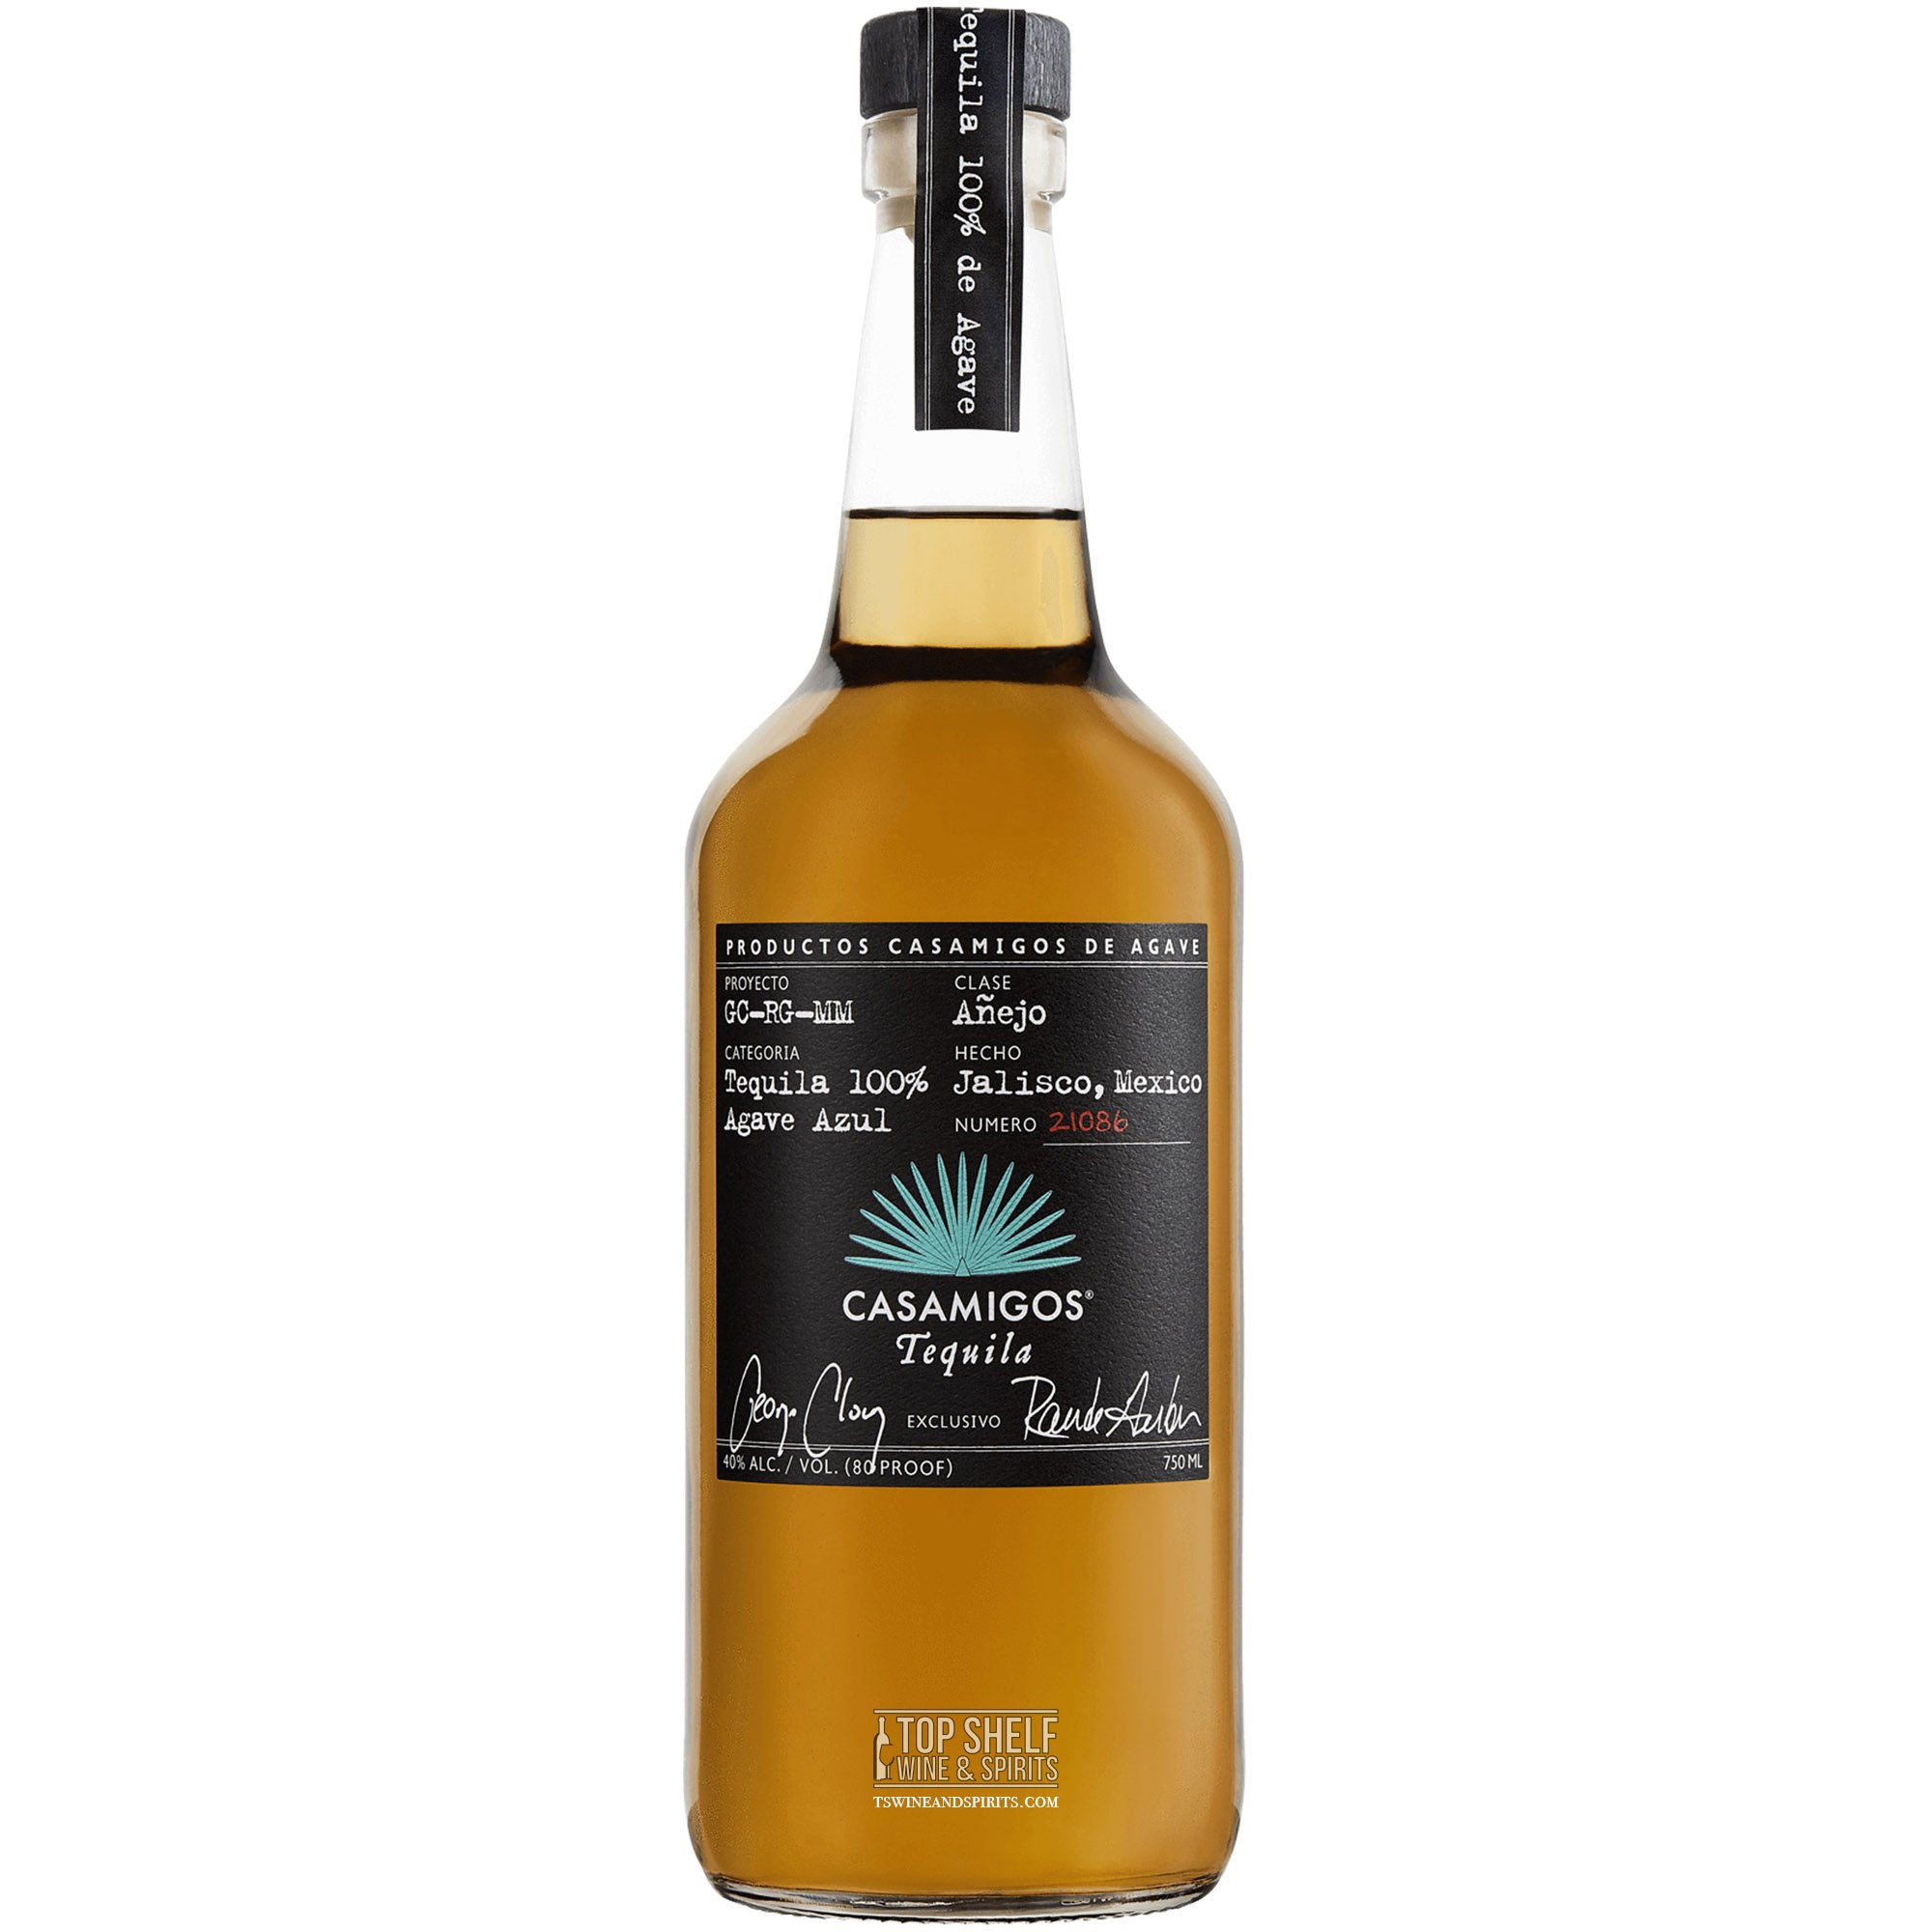 Casamigos Tequila Price: Decoding the Value of Friendship